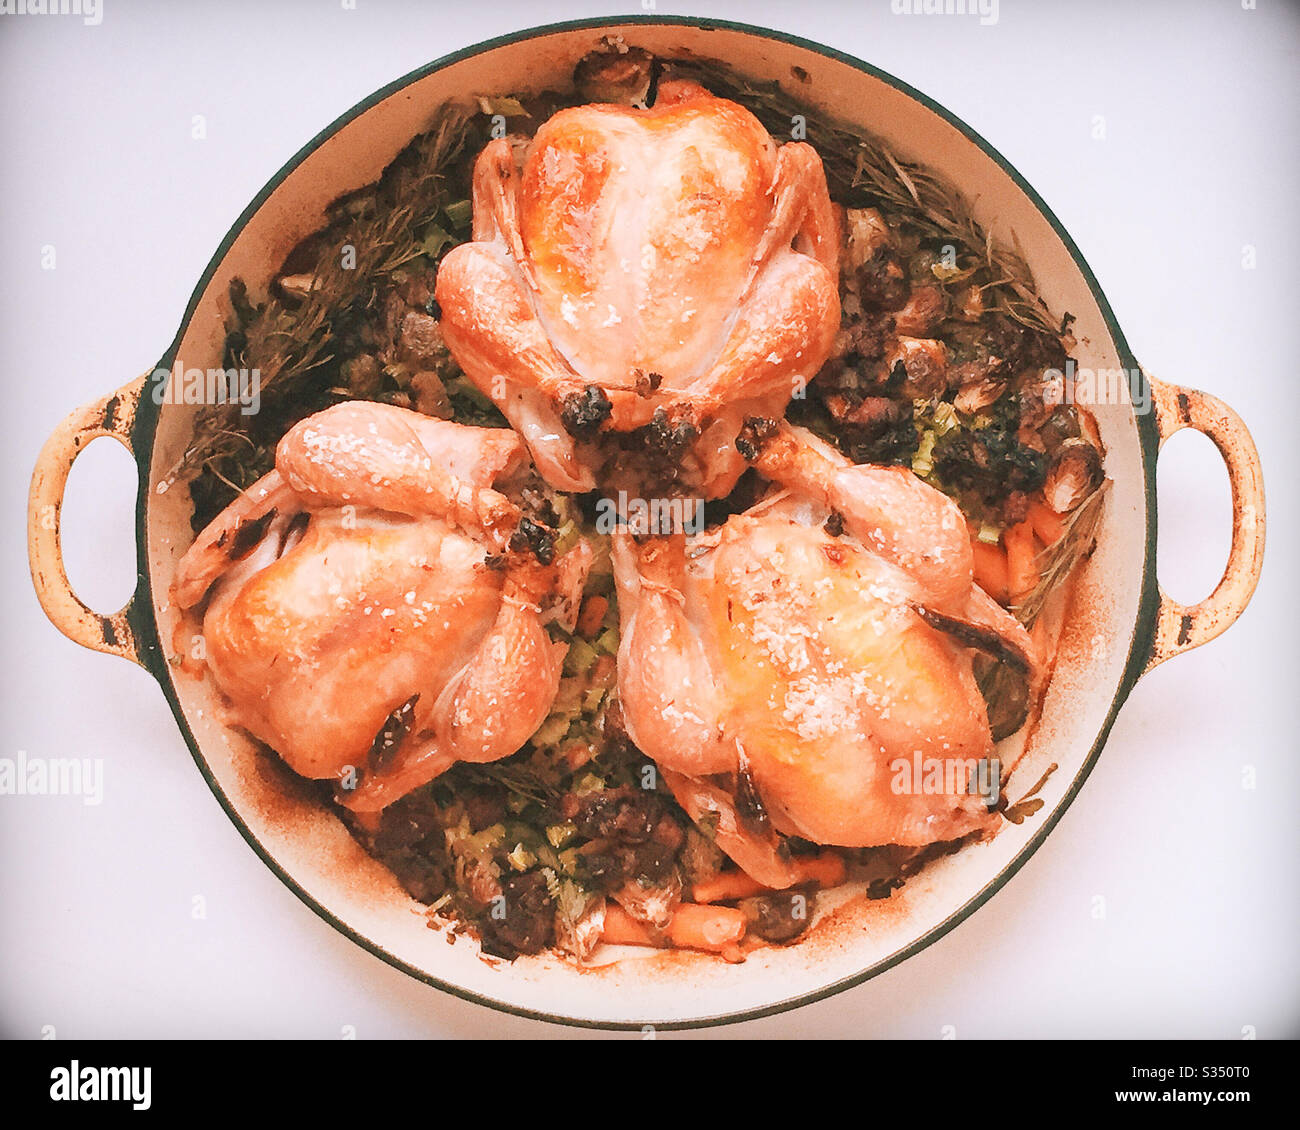 Cornish Hens, Roasted and Presented for Service Stock Photo